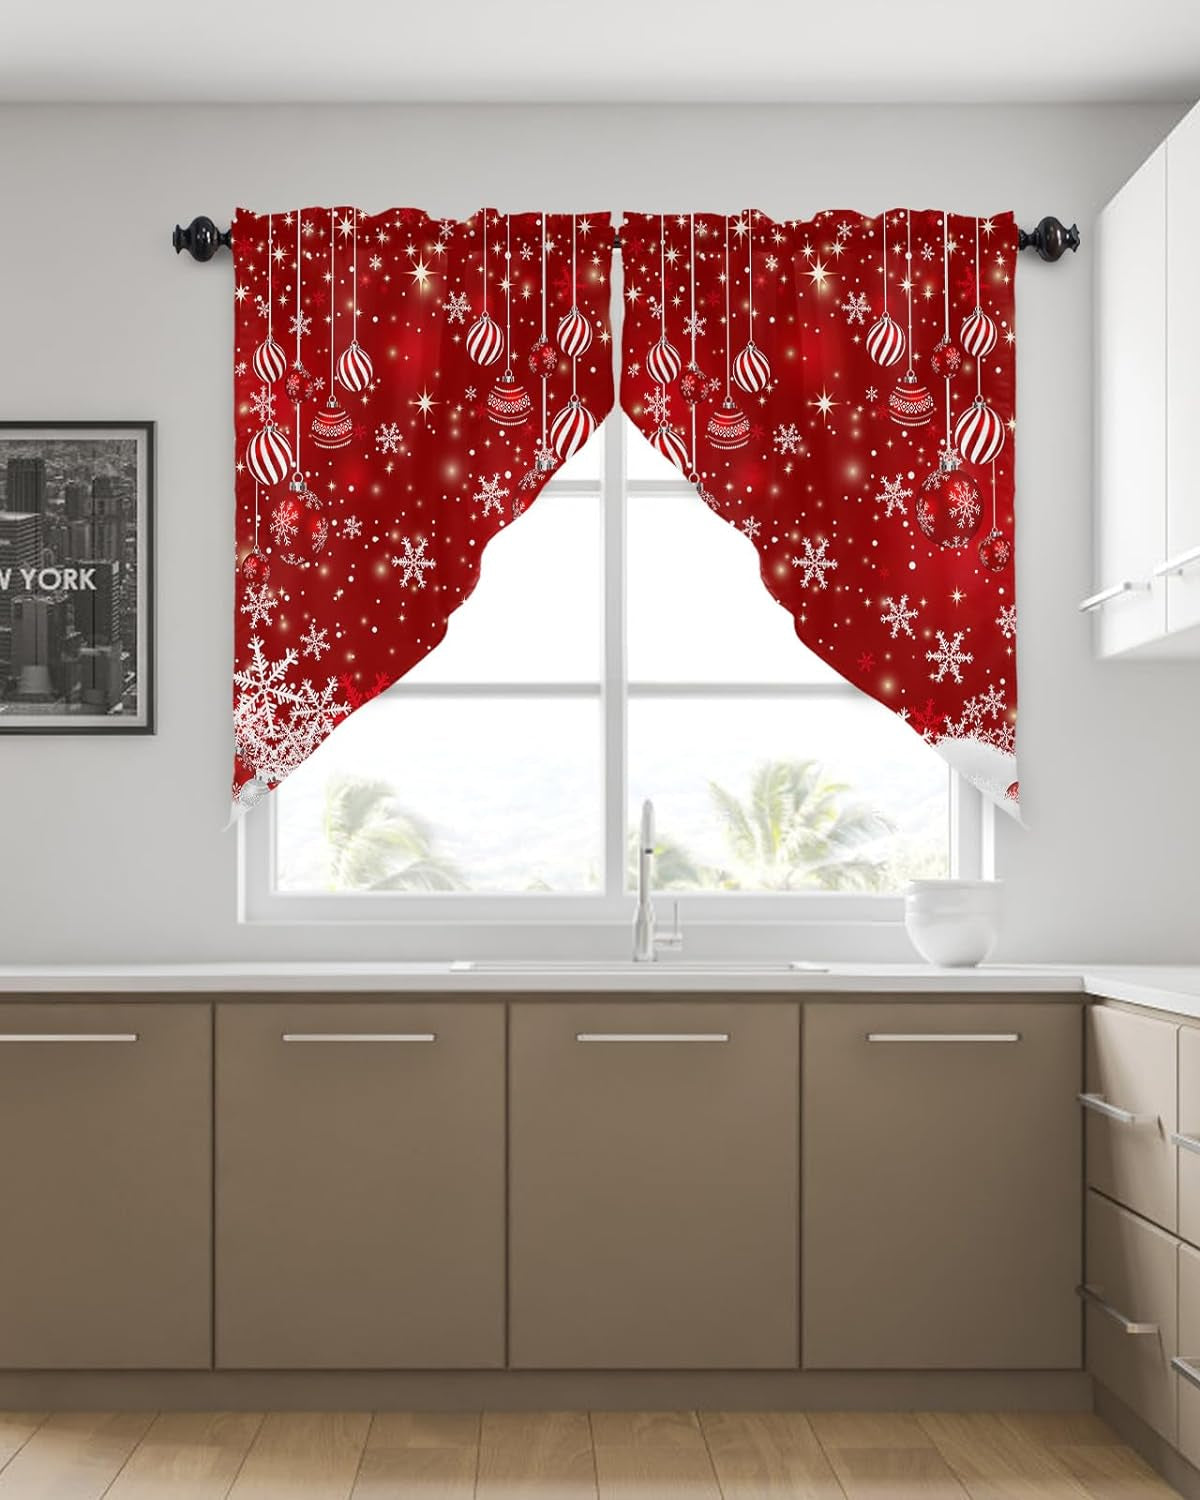 Christmas Kitchen Curtains Winter Snowflakes Window Valance Set,Red Xmas Balls Ornaments Rod Pocket Curtains Swag for Bedroom Living Room, Sparkle Snow Xmas Red Swag Valance 36" Long Set